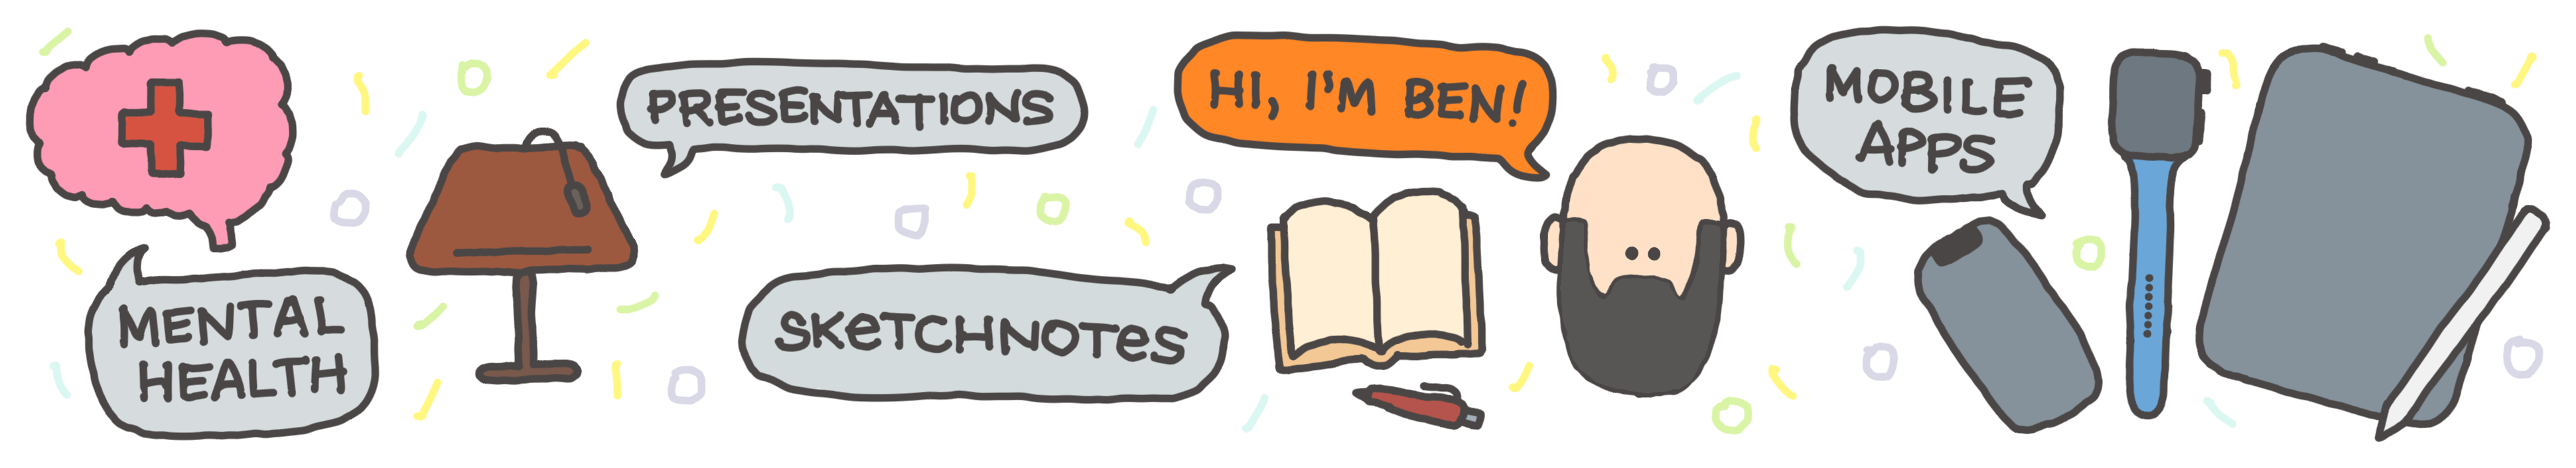 Why I Sketchnote: Confessions of a Compulsive Note-Taker